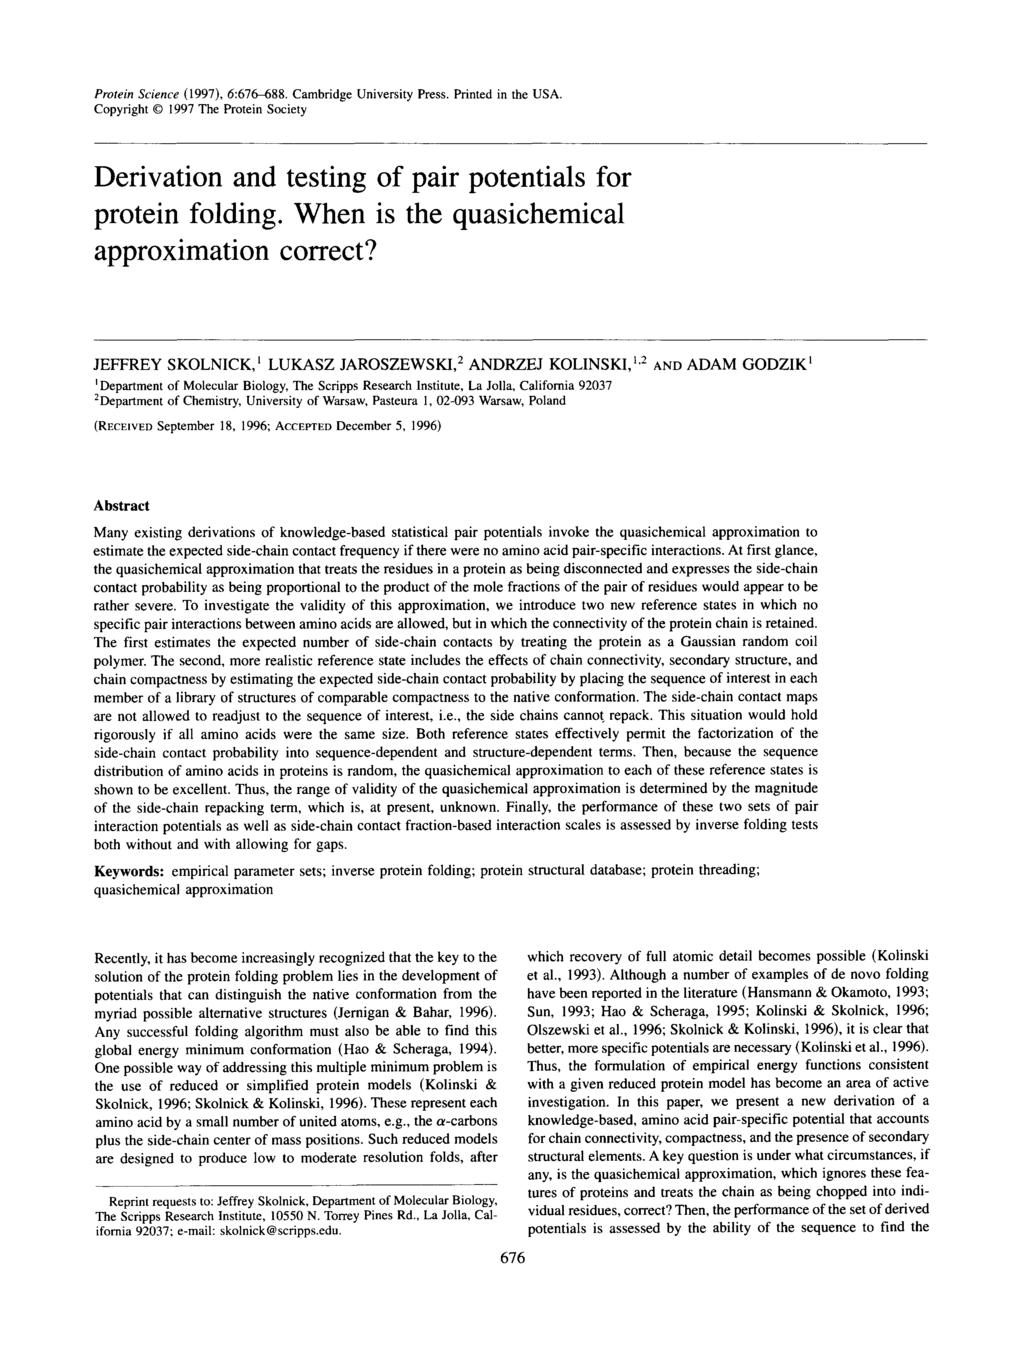 Protein Science (1997), 667M88. Cambridge University Press. Printed in the Copyright 0 1997 The Protein Society USA. Derivation and testing of pair potentials for protein folding.